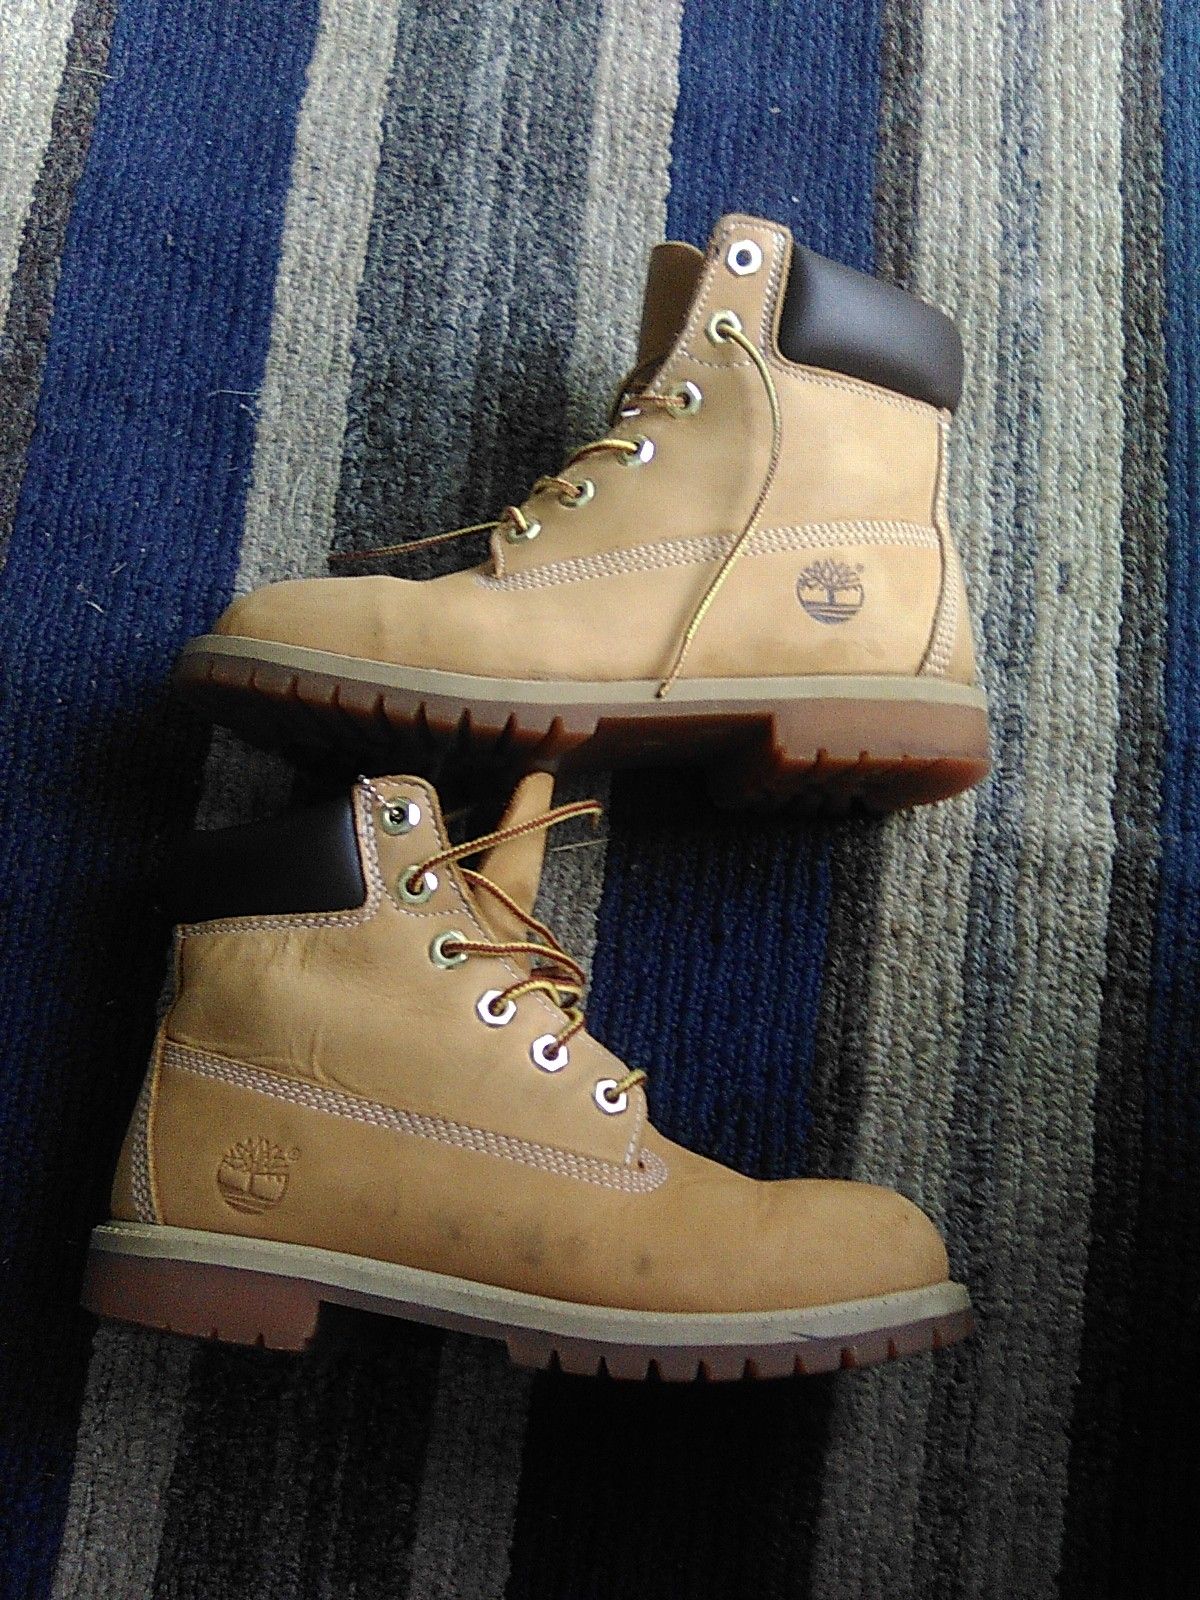 Timberland boots Men's size 5